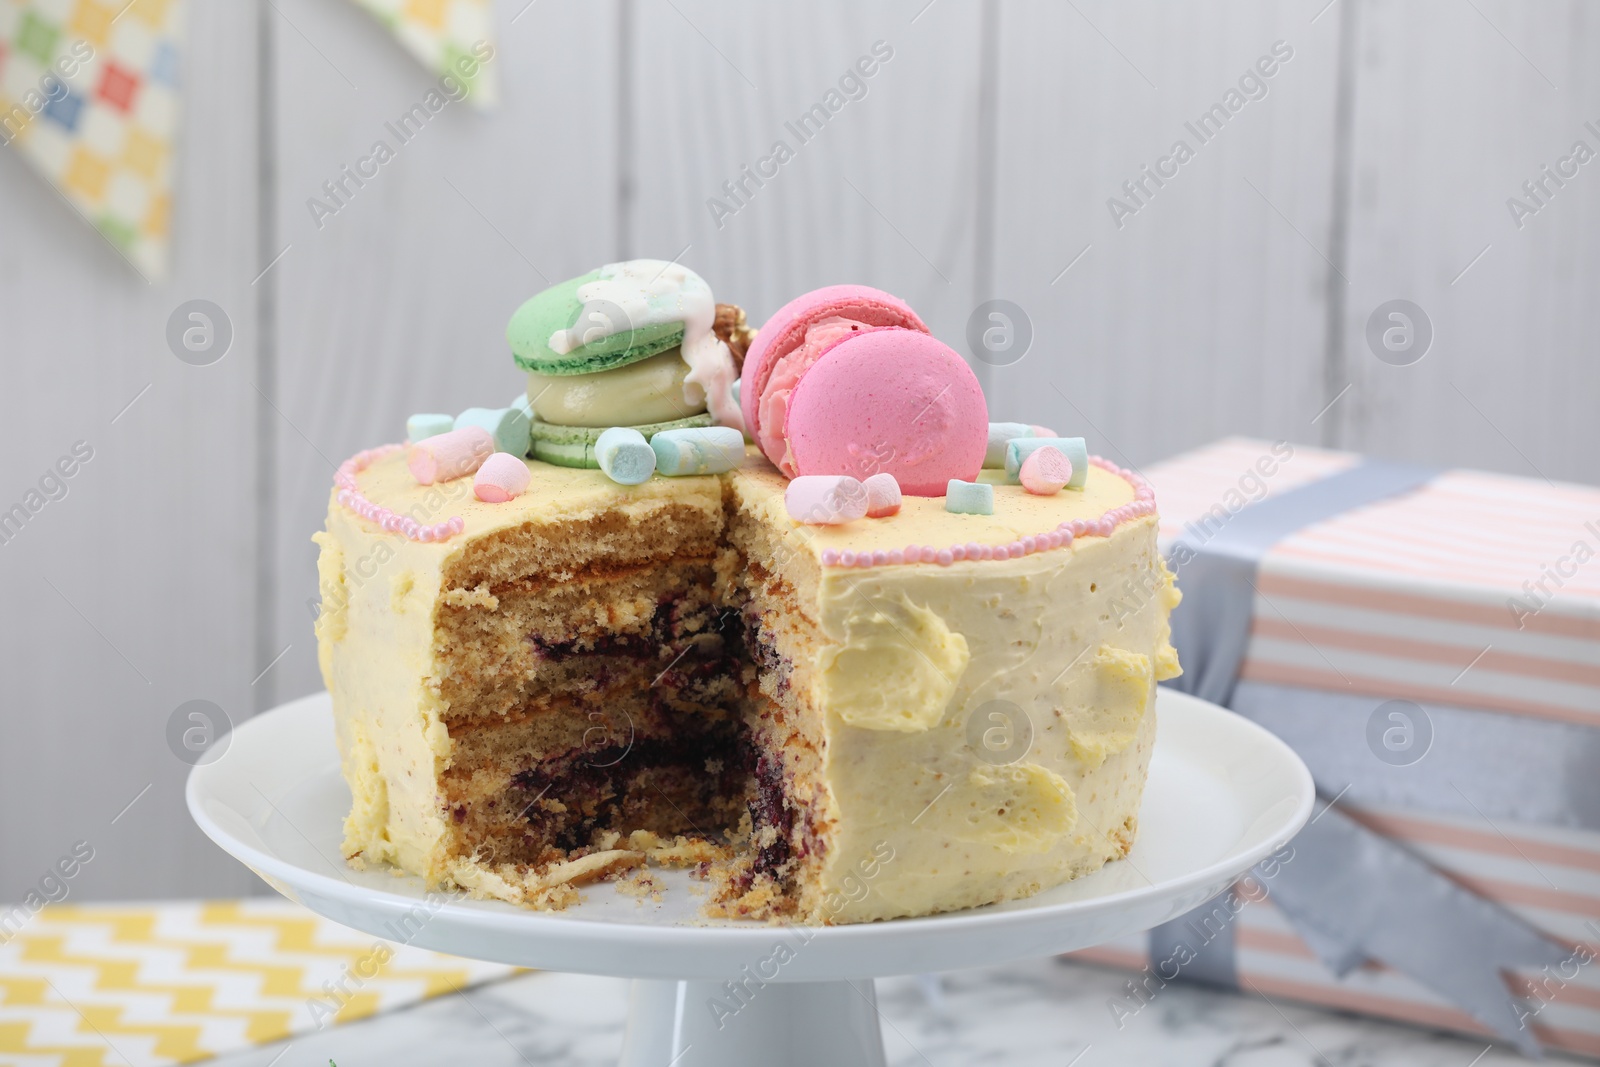 Photo of Delicious cake decorated with macarons and marshmallows on table, closeup view